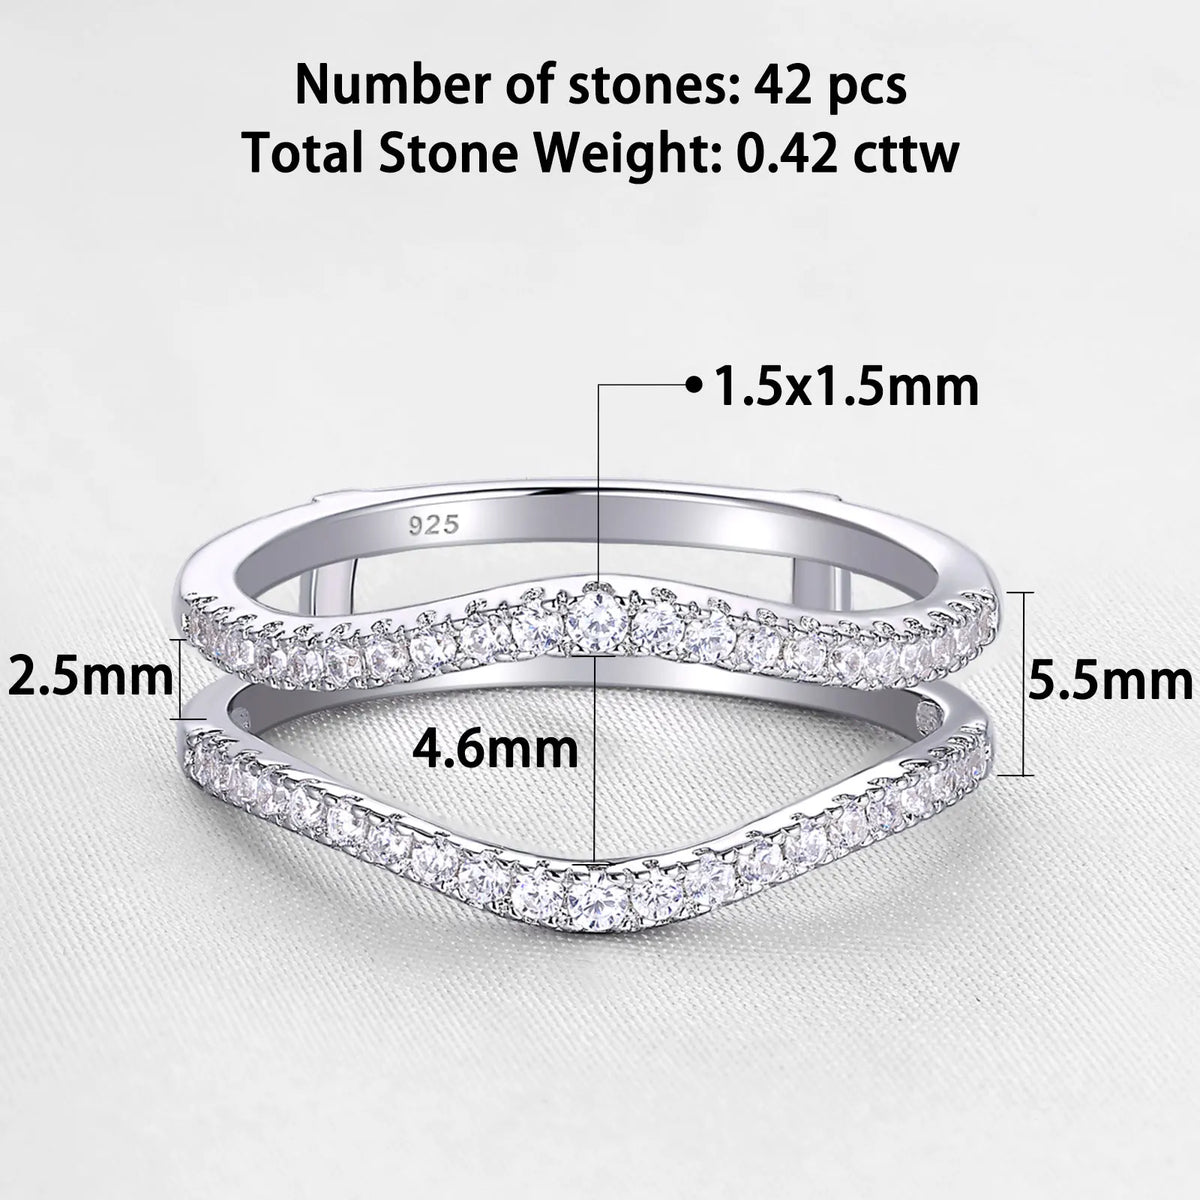 925 Sterling Silver Curved Wedding Bands for Women Ring Enhancer Guard